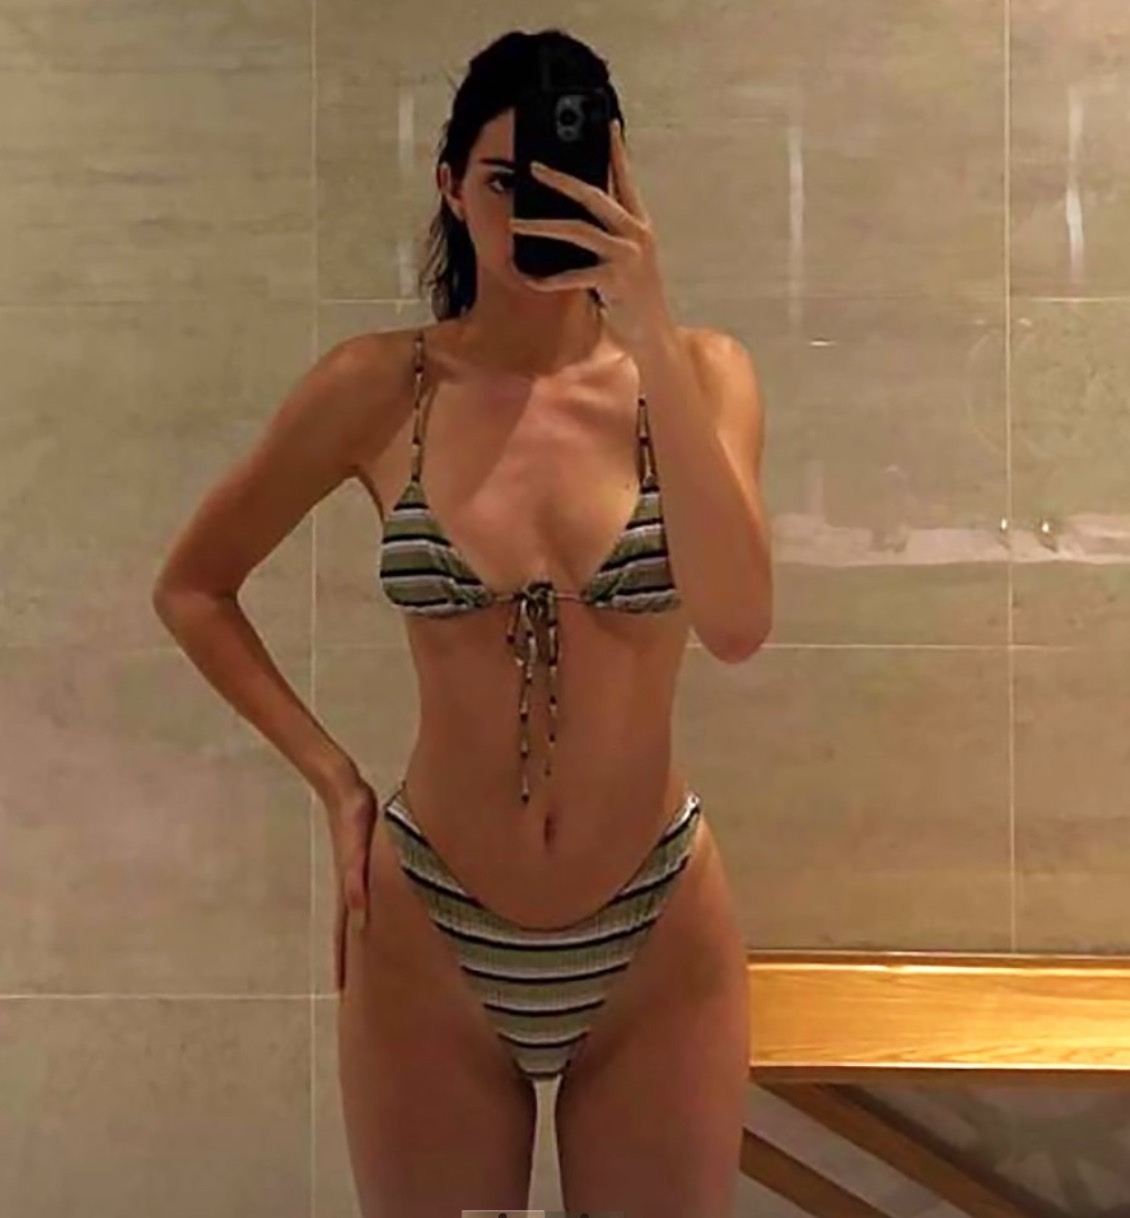 Kendall Jenner shows off incredible figure in racy new video: Kim  Kardashian approves